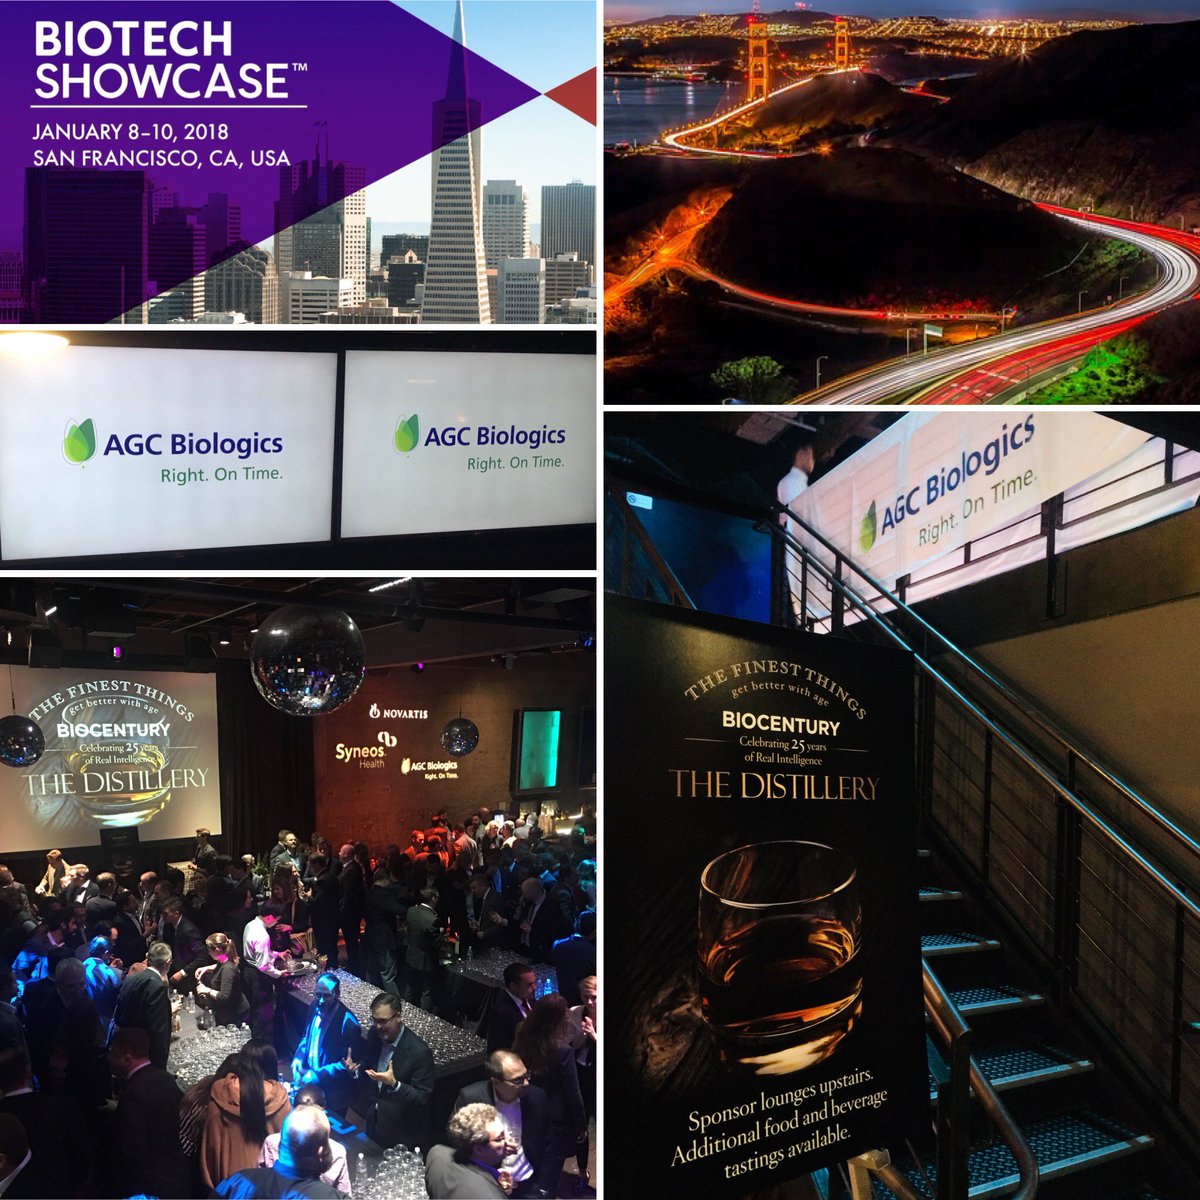 It was a great week @EBDGroup #BTS18, and we cannot believe it’s over so fast. Thank you to those who joined us throughout, and please do not forget to follow us on @AGCBiologics going forward!